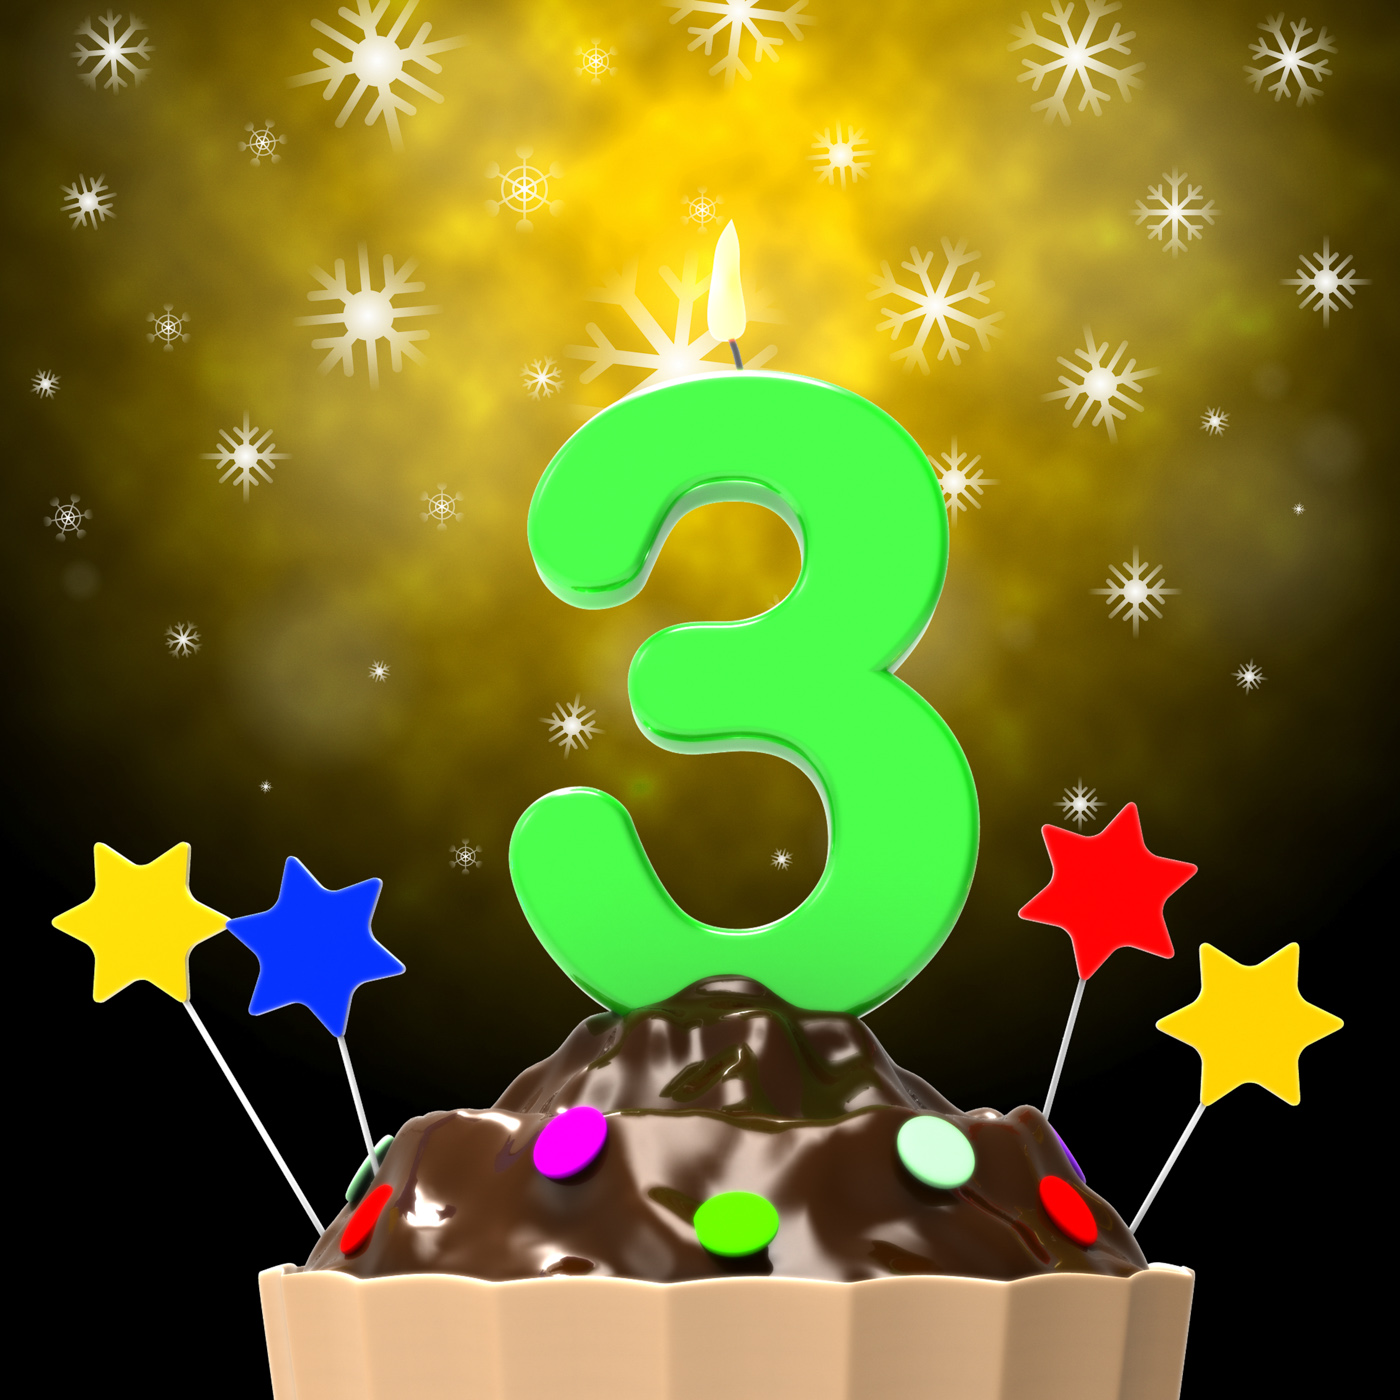 Three candle on cupcake means decorated cakes and candles photo